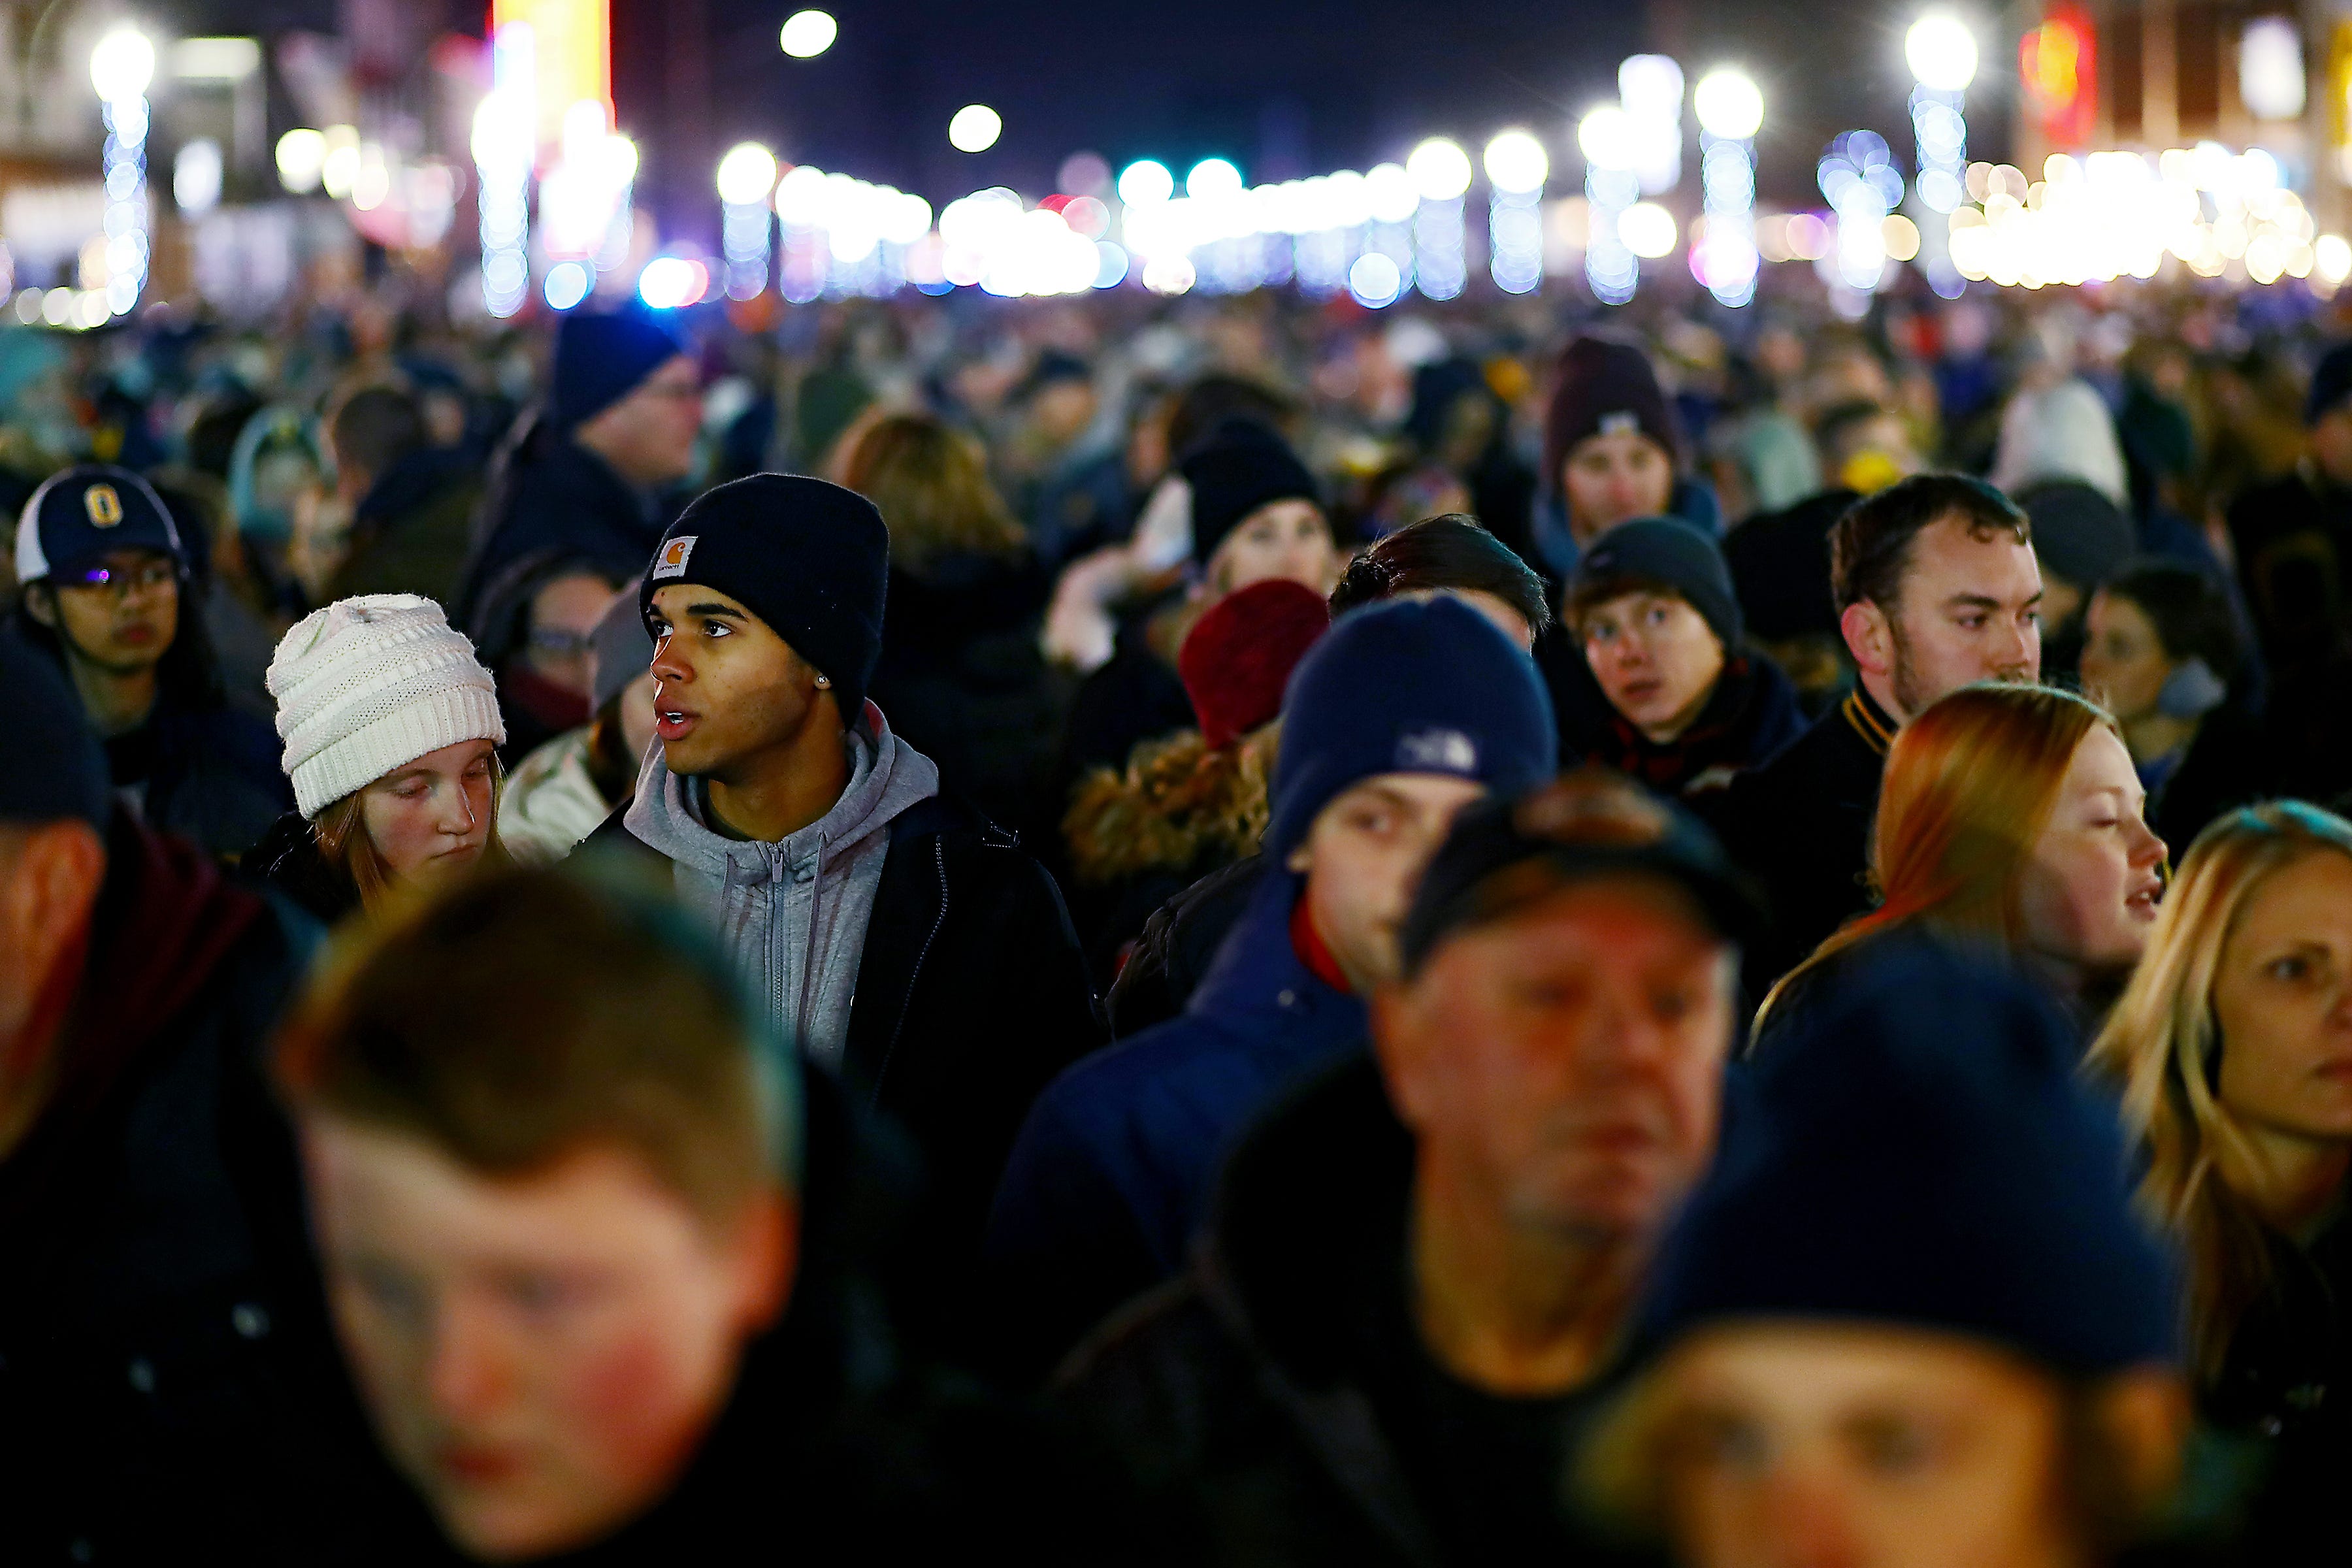 Thousands of people from around metro Detroit gathered in downtown Oxford for a candlelight vigil on Friday, Dec. 3, 2021.